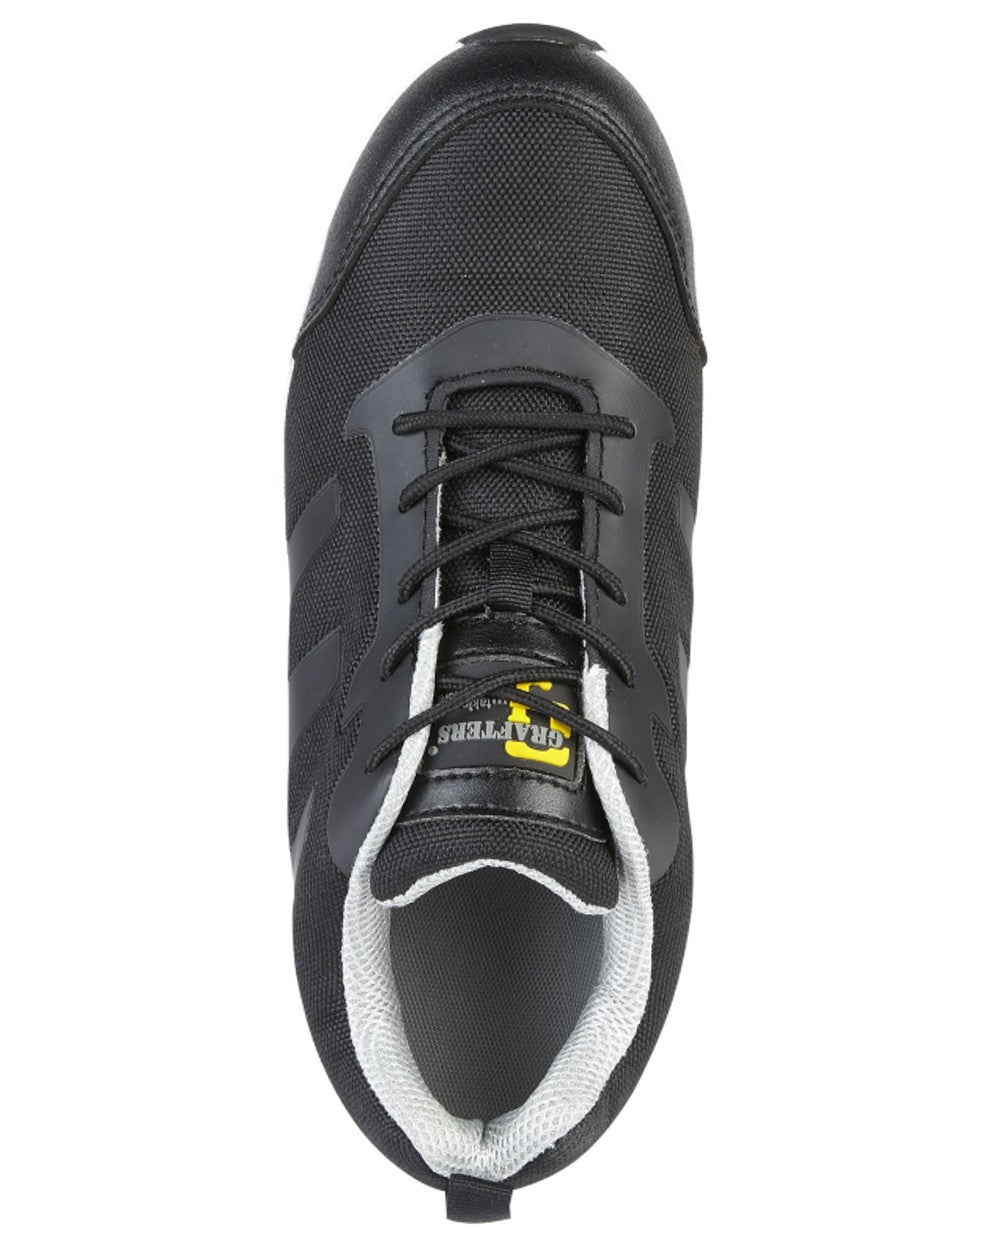 Grafters Nylon Mesh Steel Toe Cap Safety Trainers in Black